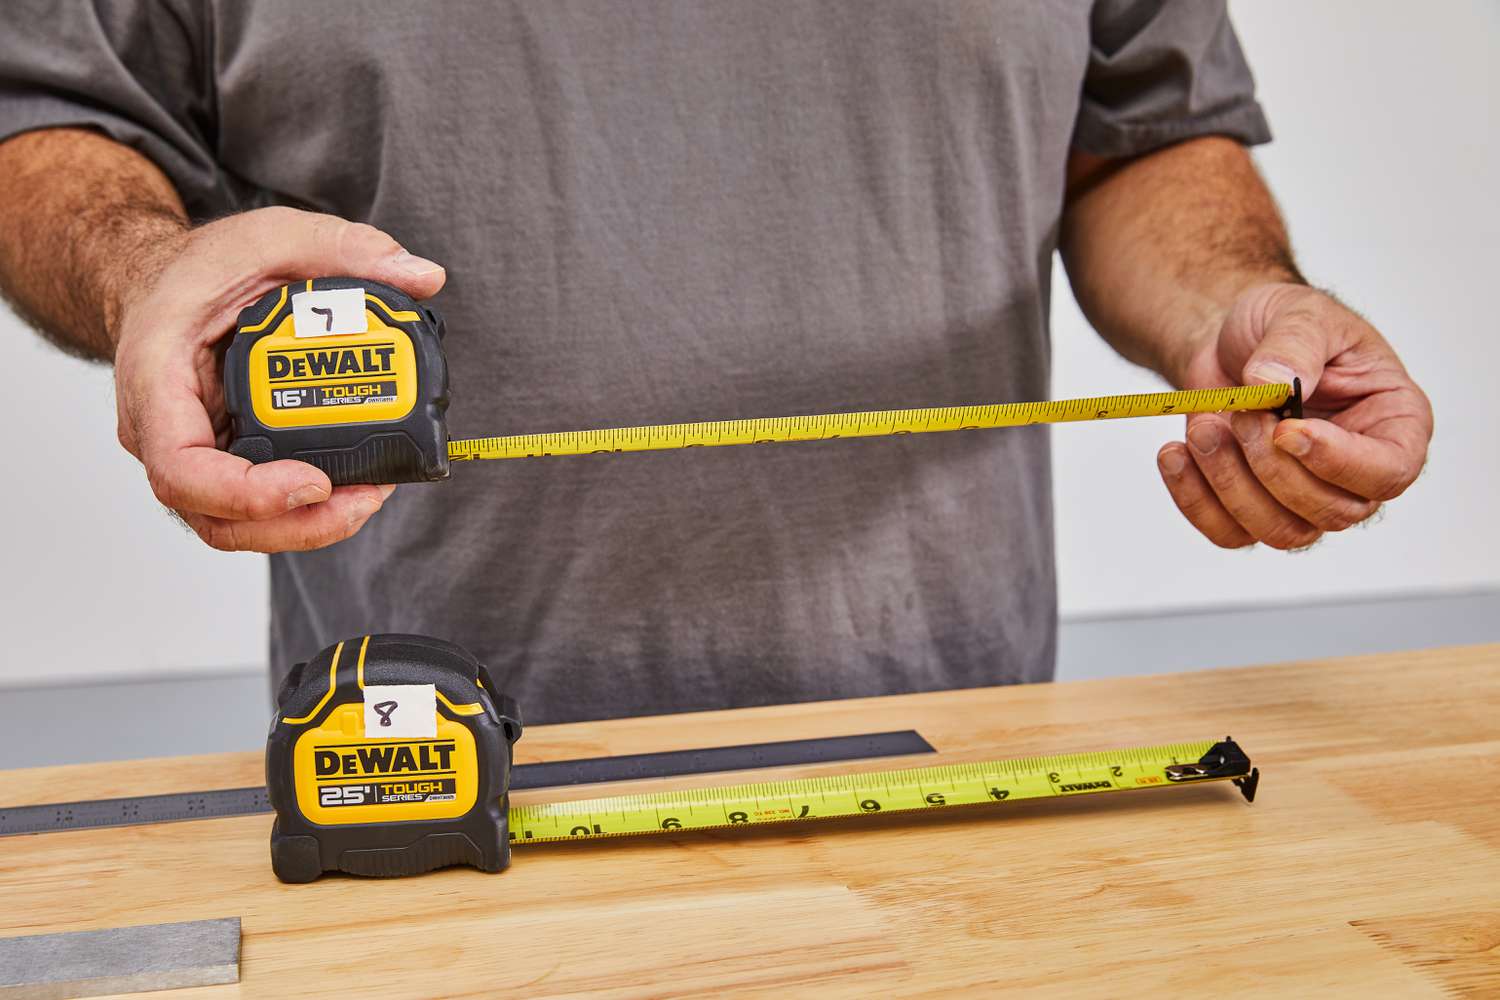 Woodcraft 16ft Tape Measure Fractional